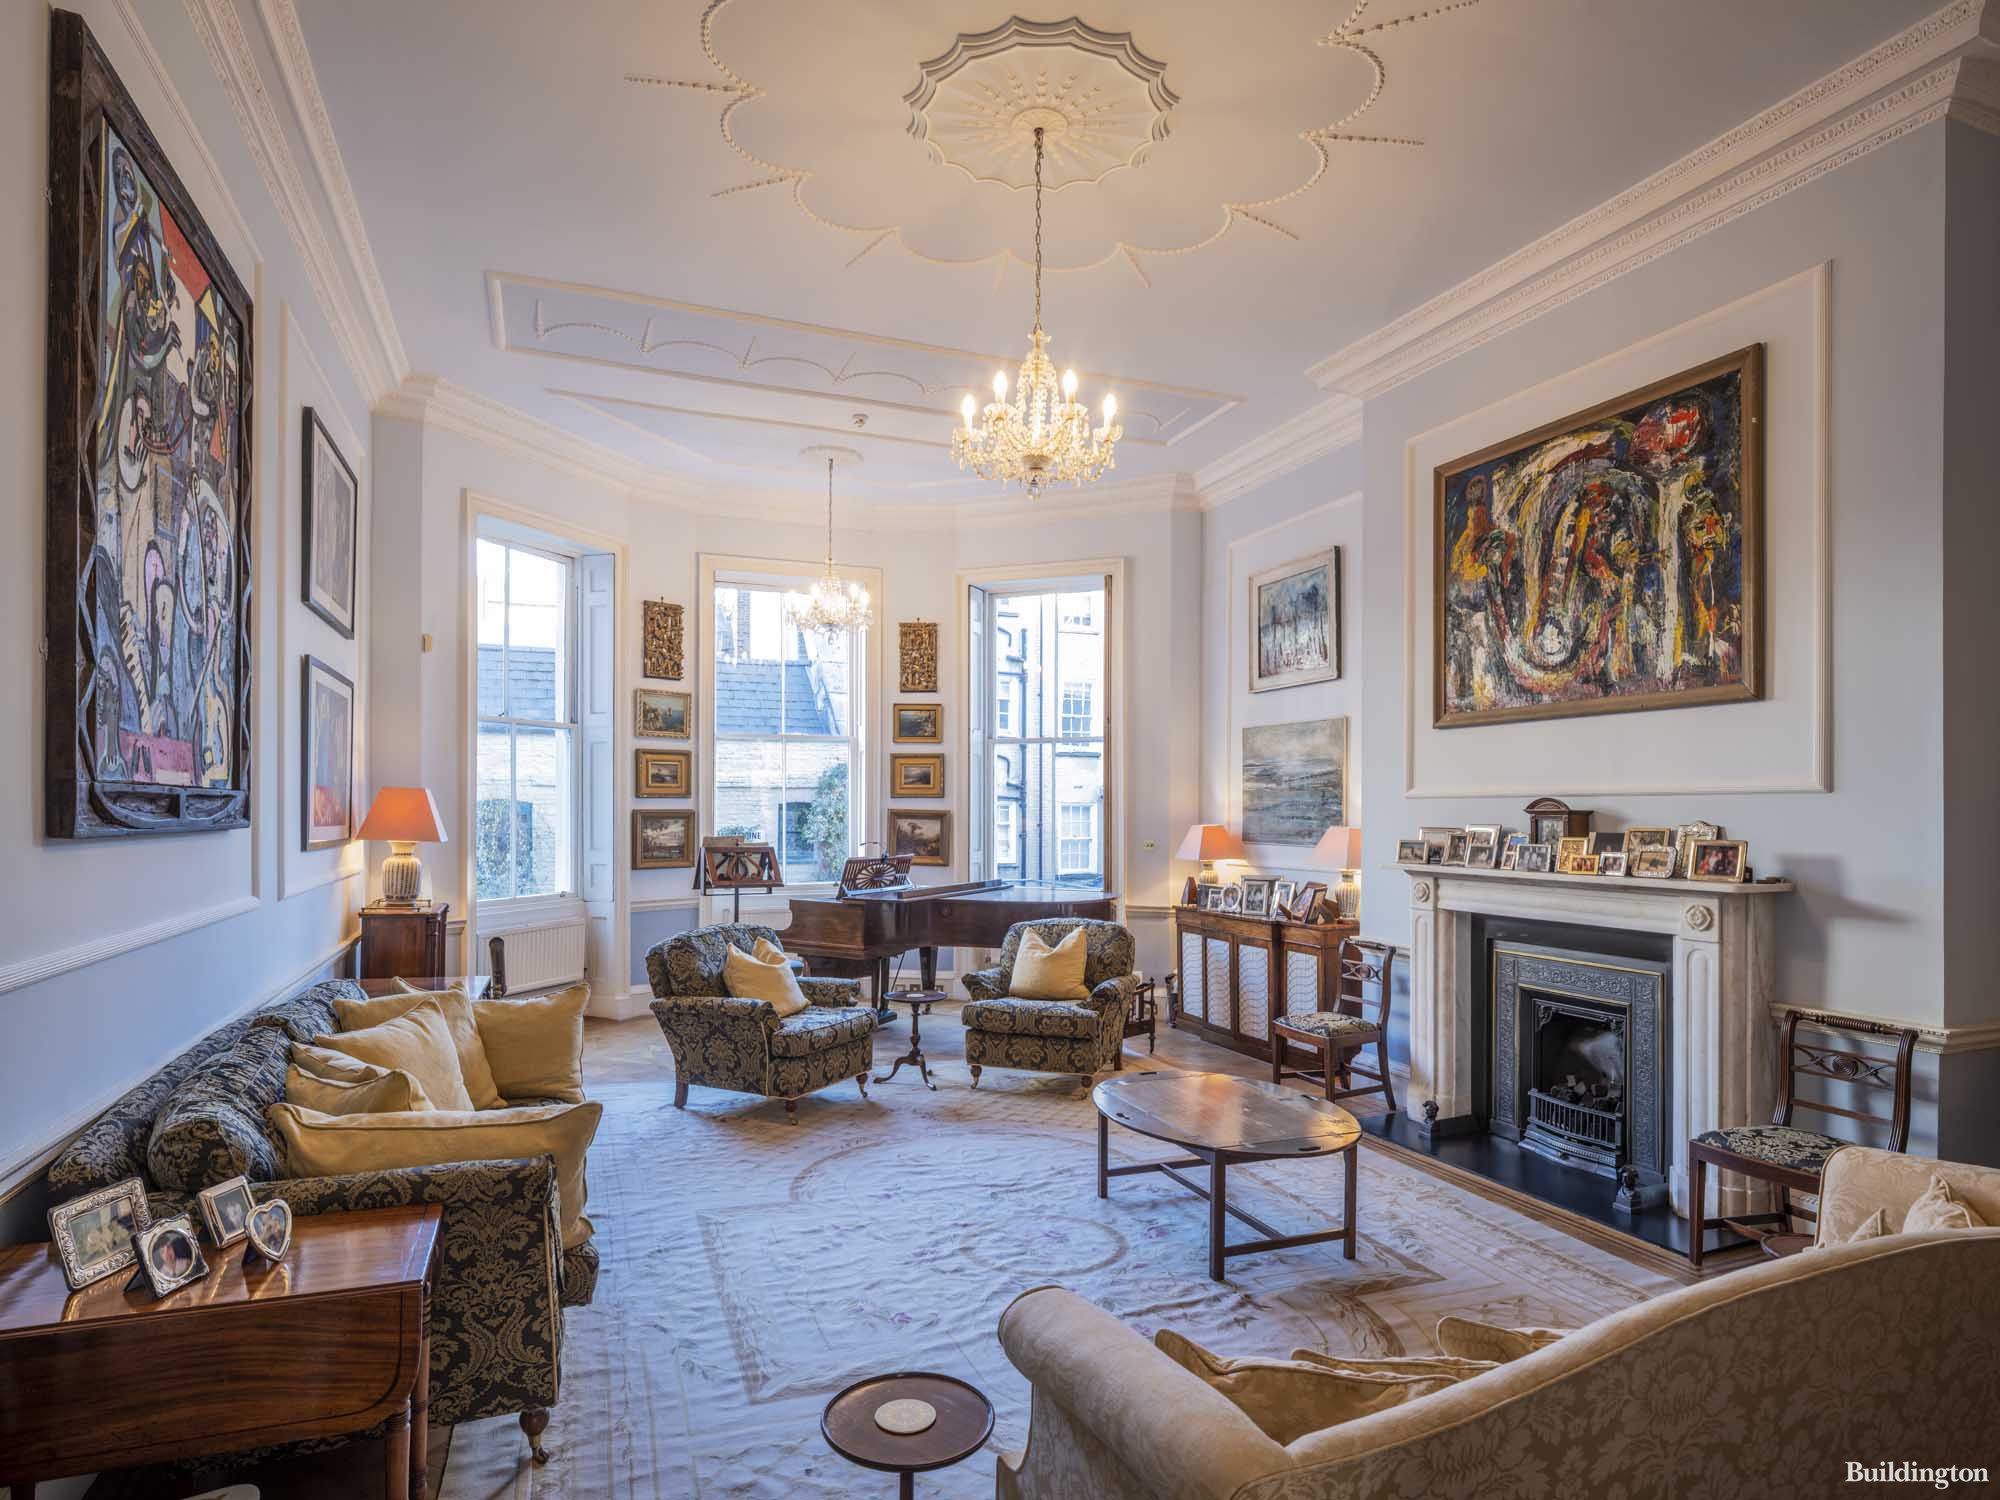 First floor drawing room at the Wimpole Street property for sale by Dexters and Aston Chase in 2023.